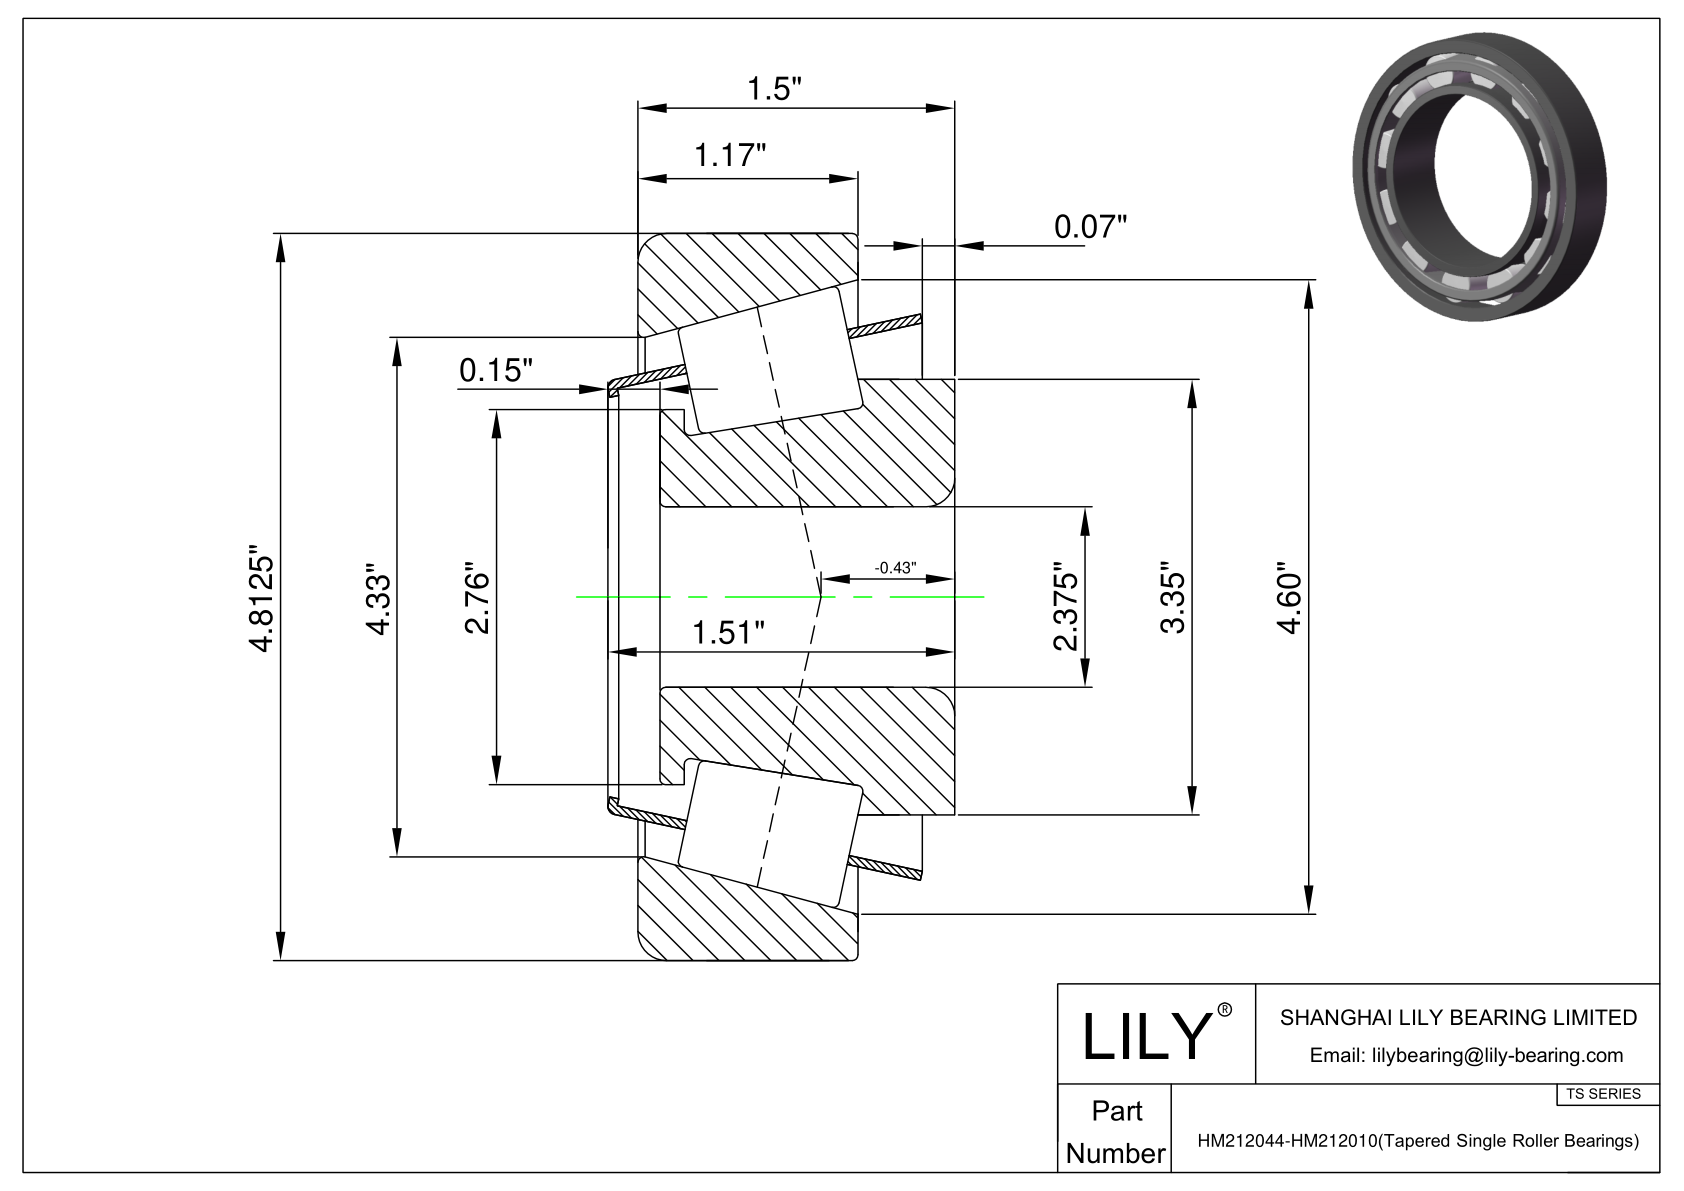 HM212044-HM212010 TS (Tapered Single Roller Bearings) (Imperial) cad drawing